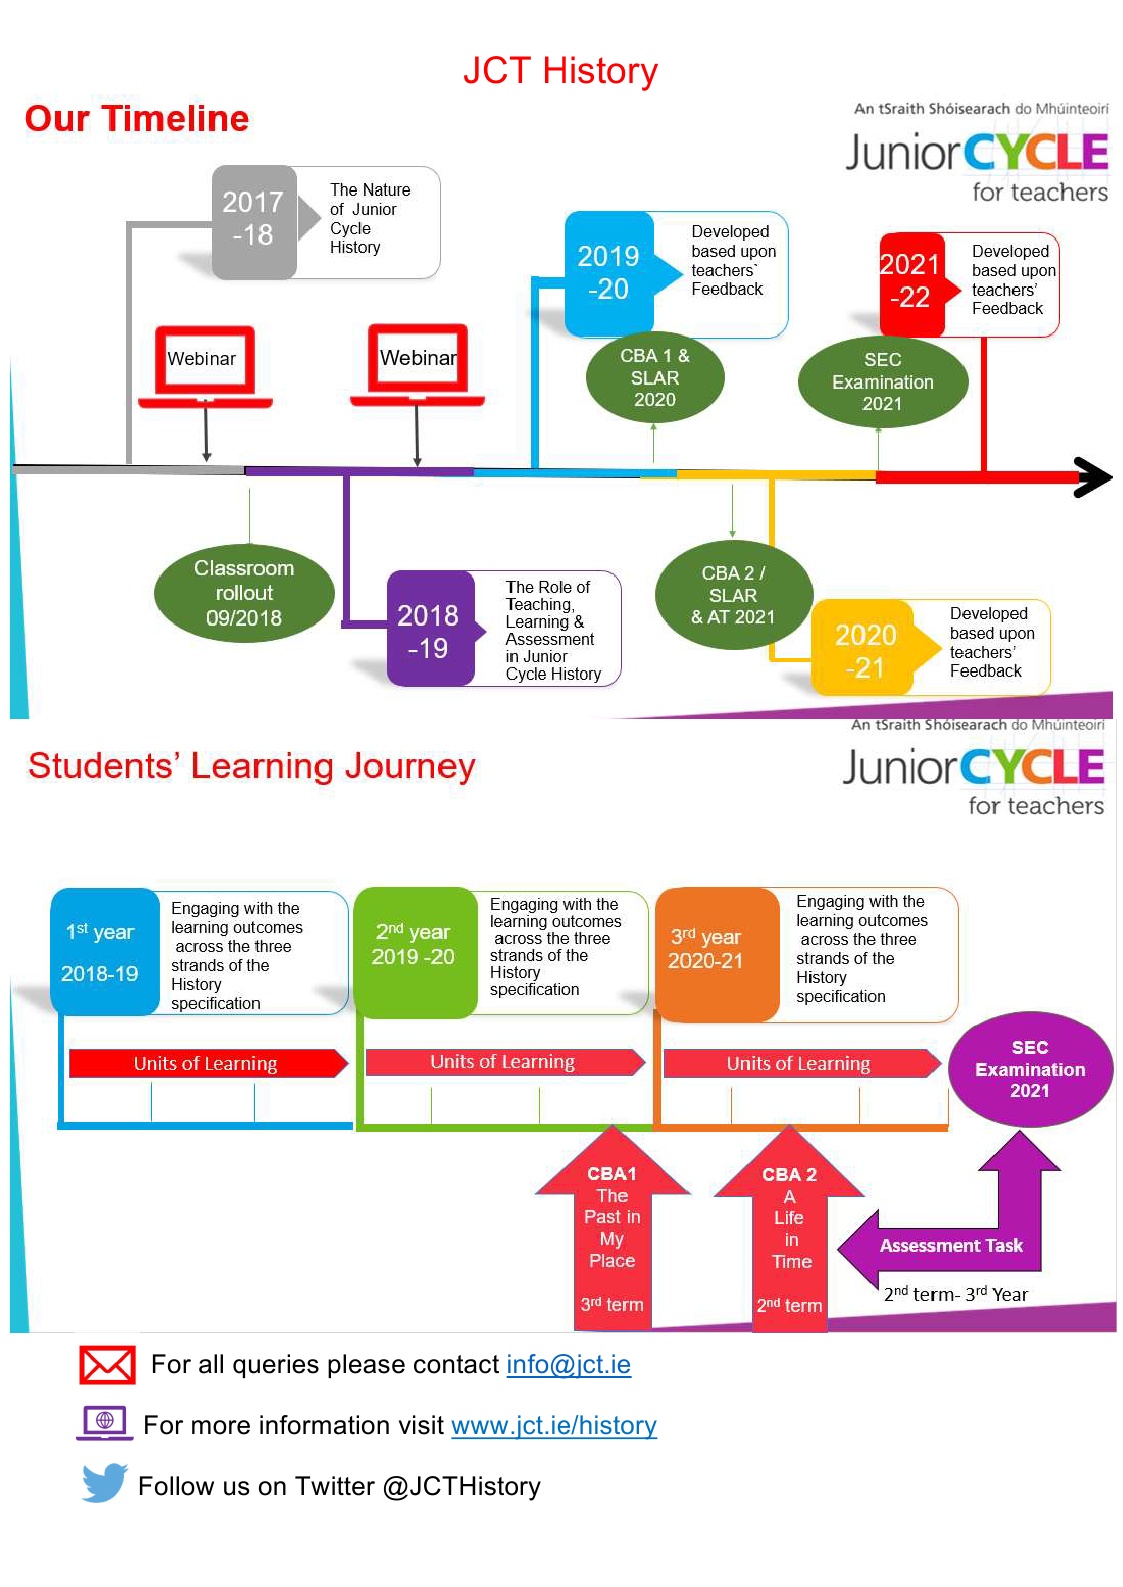 Teaching and Learning Timeline